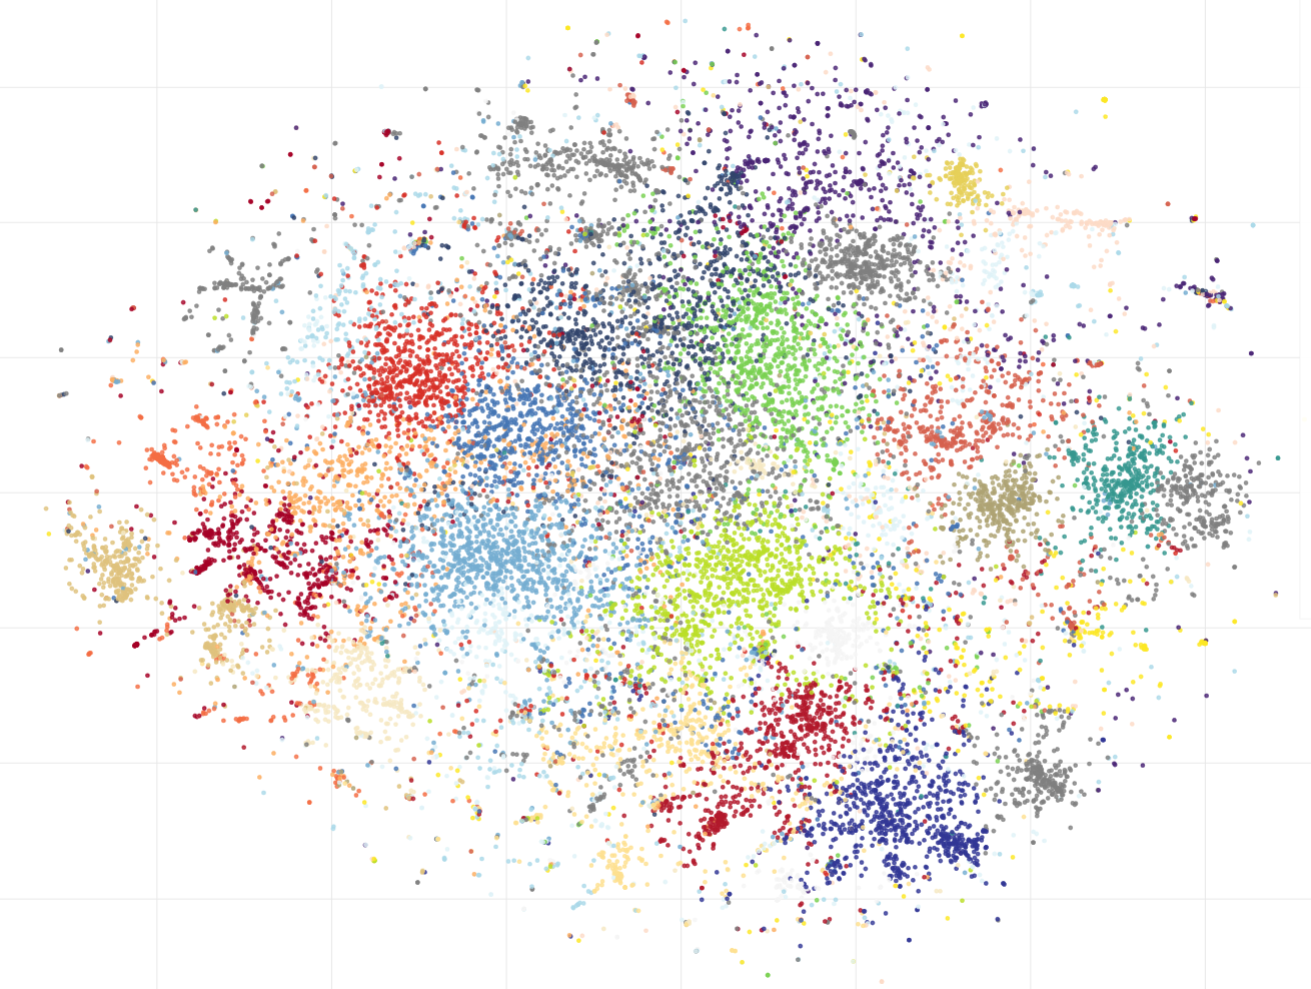 What People Write about Climate: Twitter Data Clustering in Python